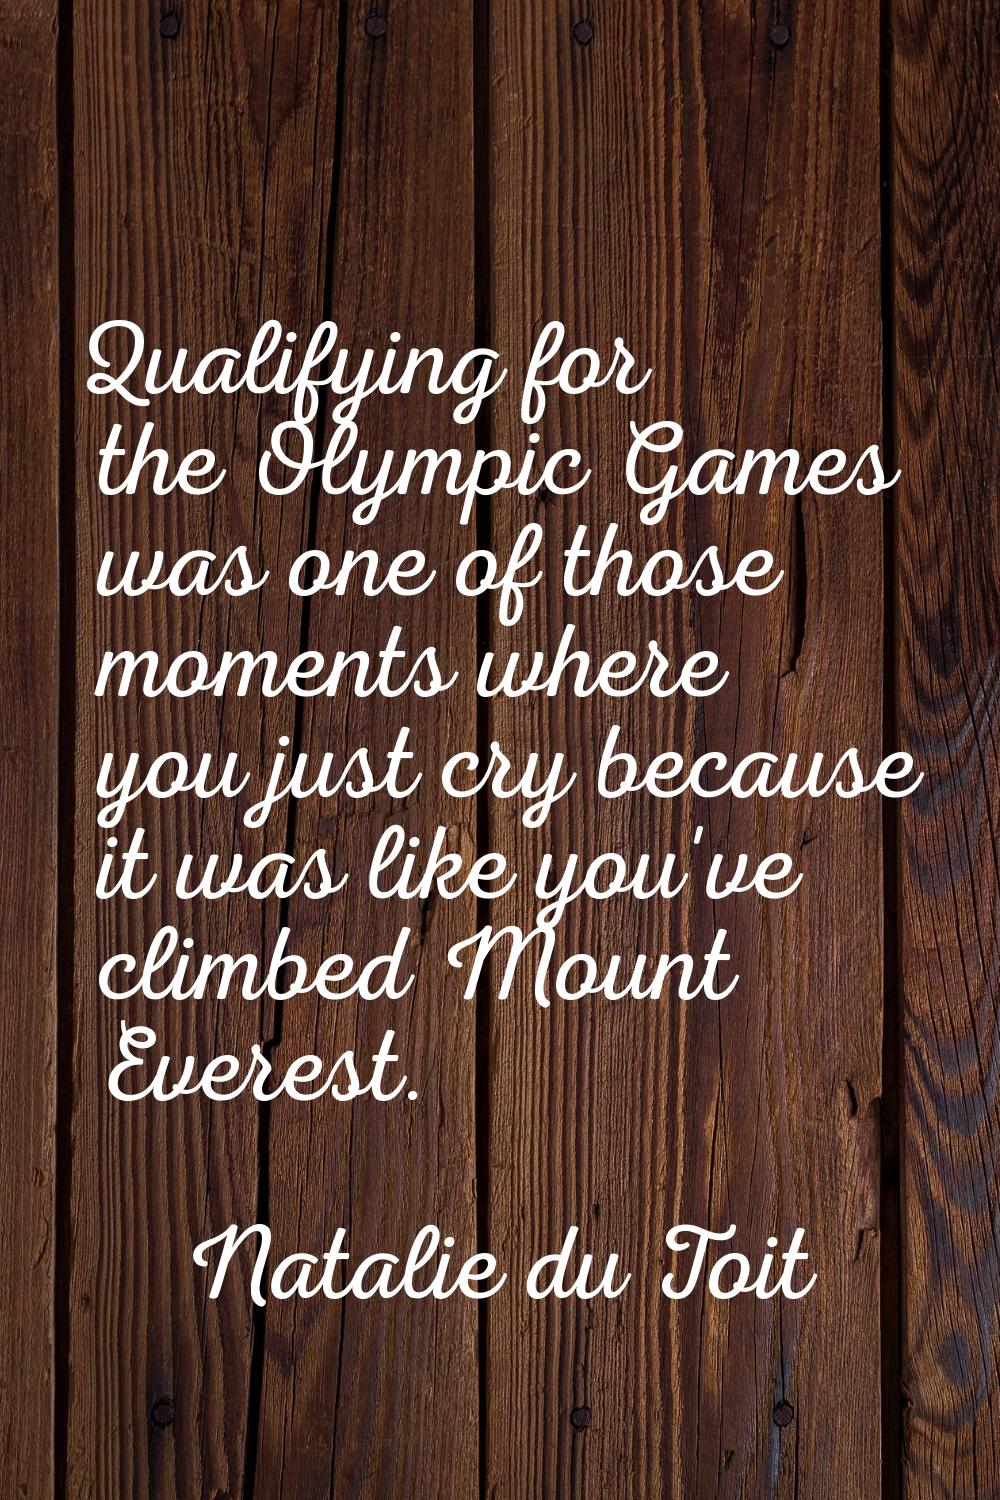 Qualifying for the Olympic Games was one of those moments where you just cry because it was like yo